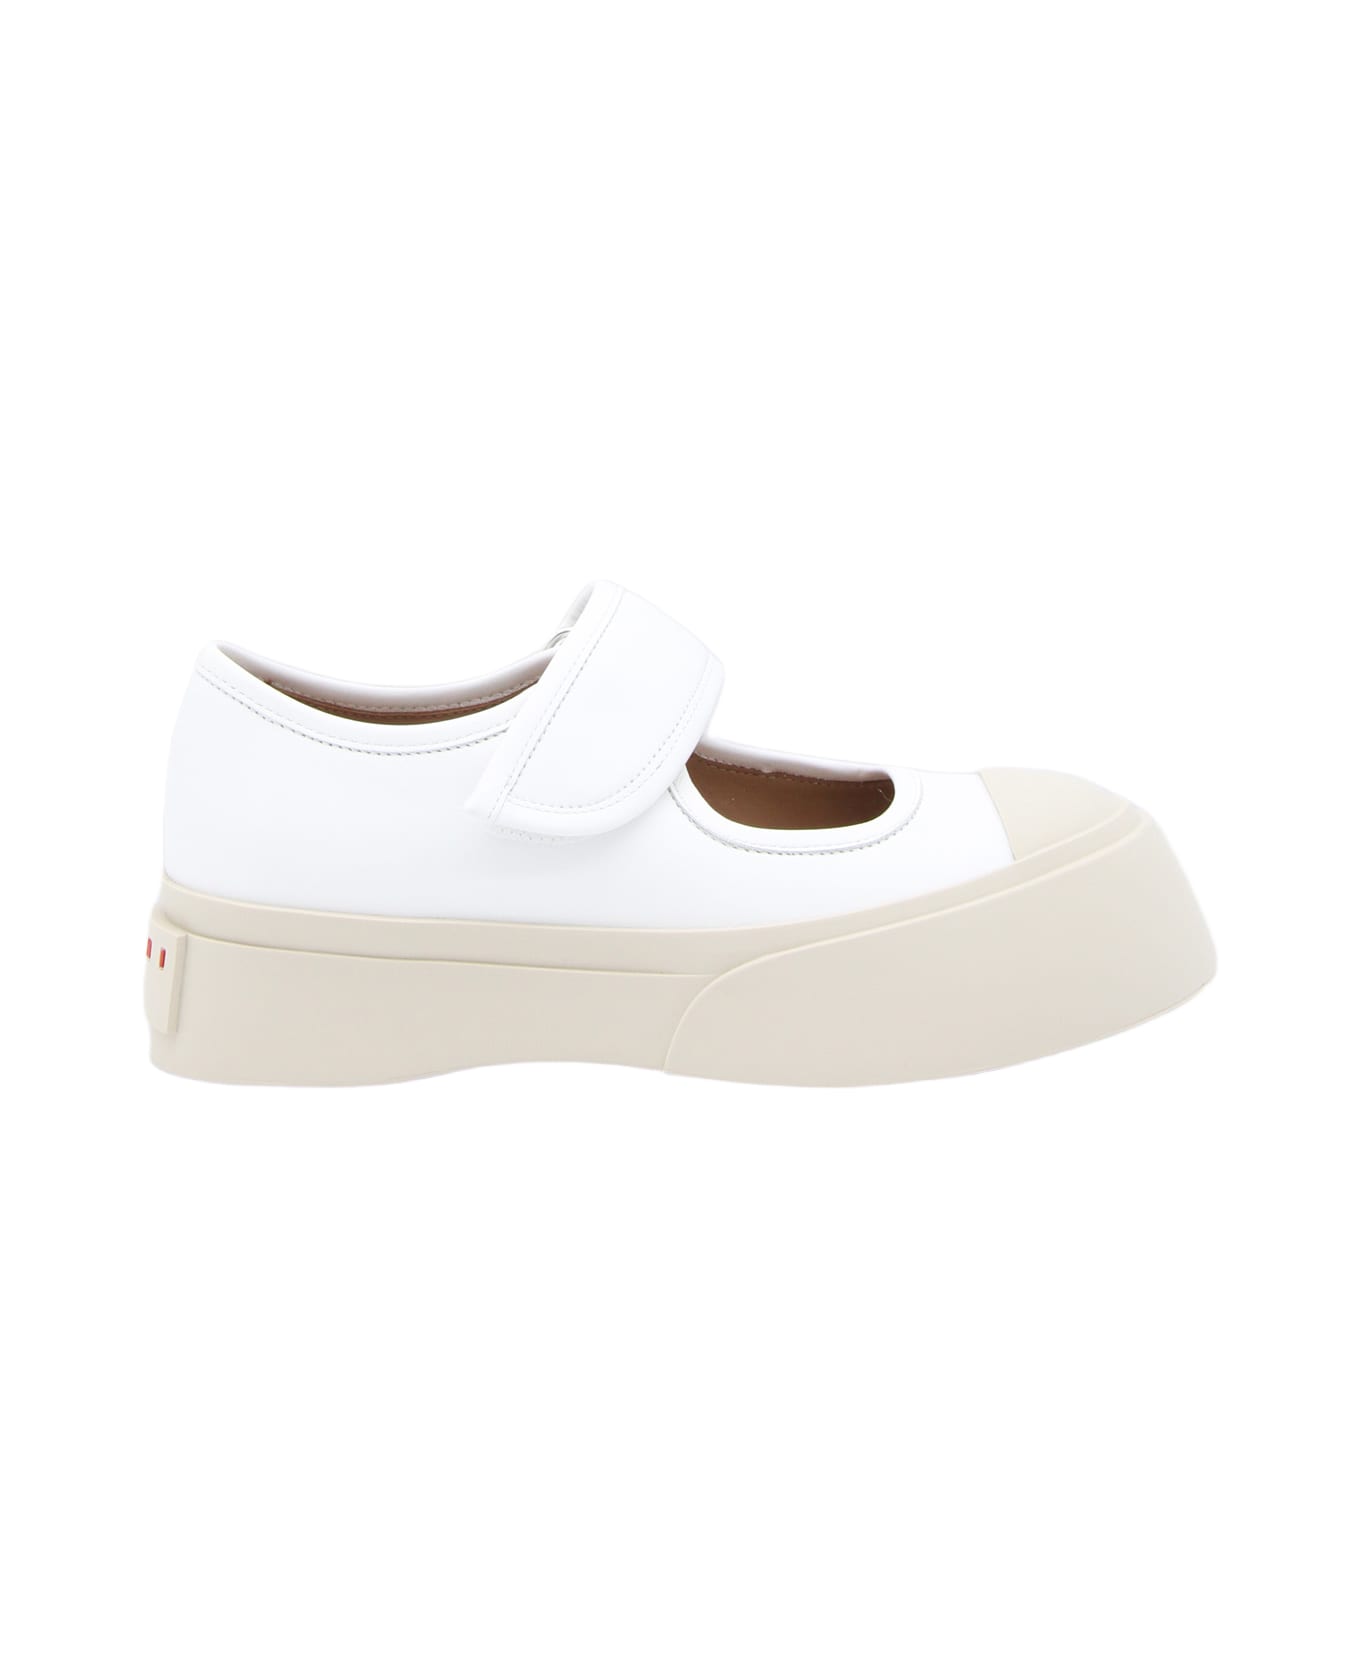 Marni White Leather Sandals - Lily white